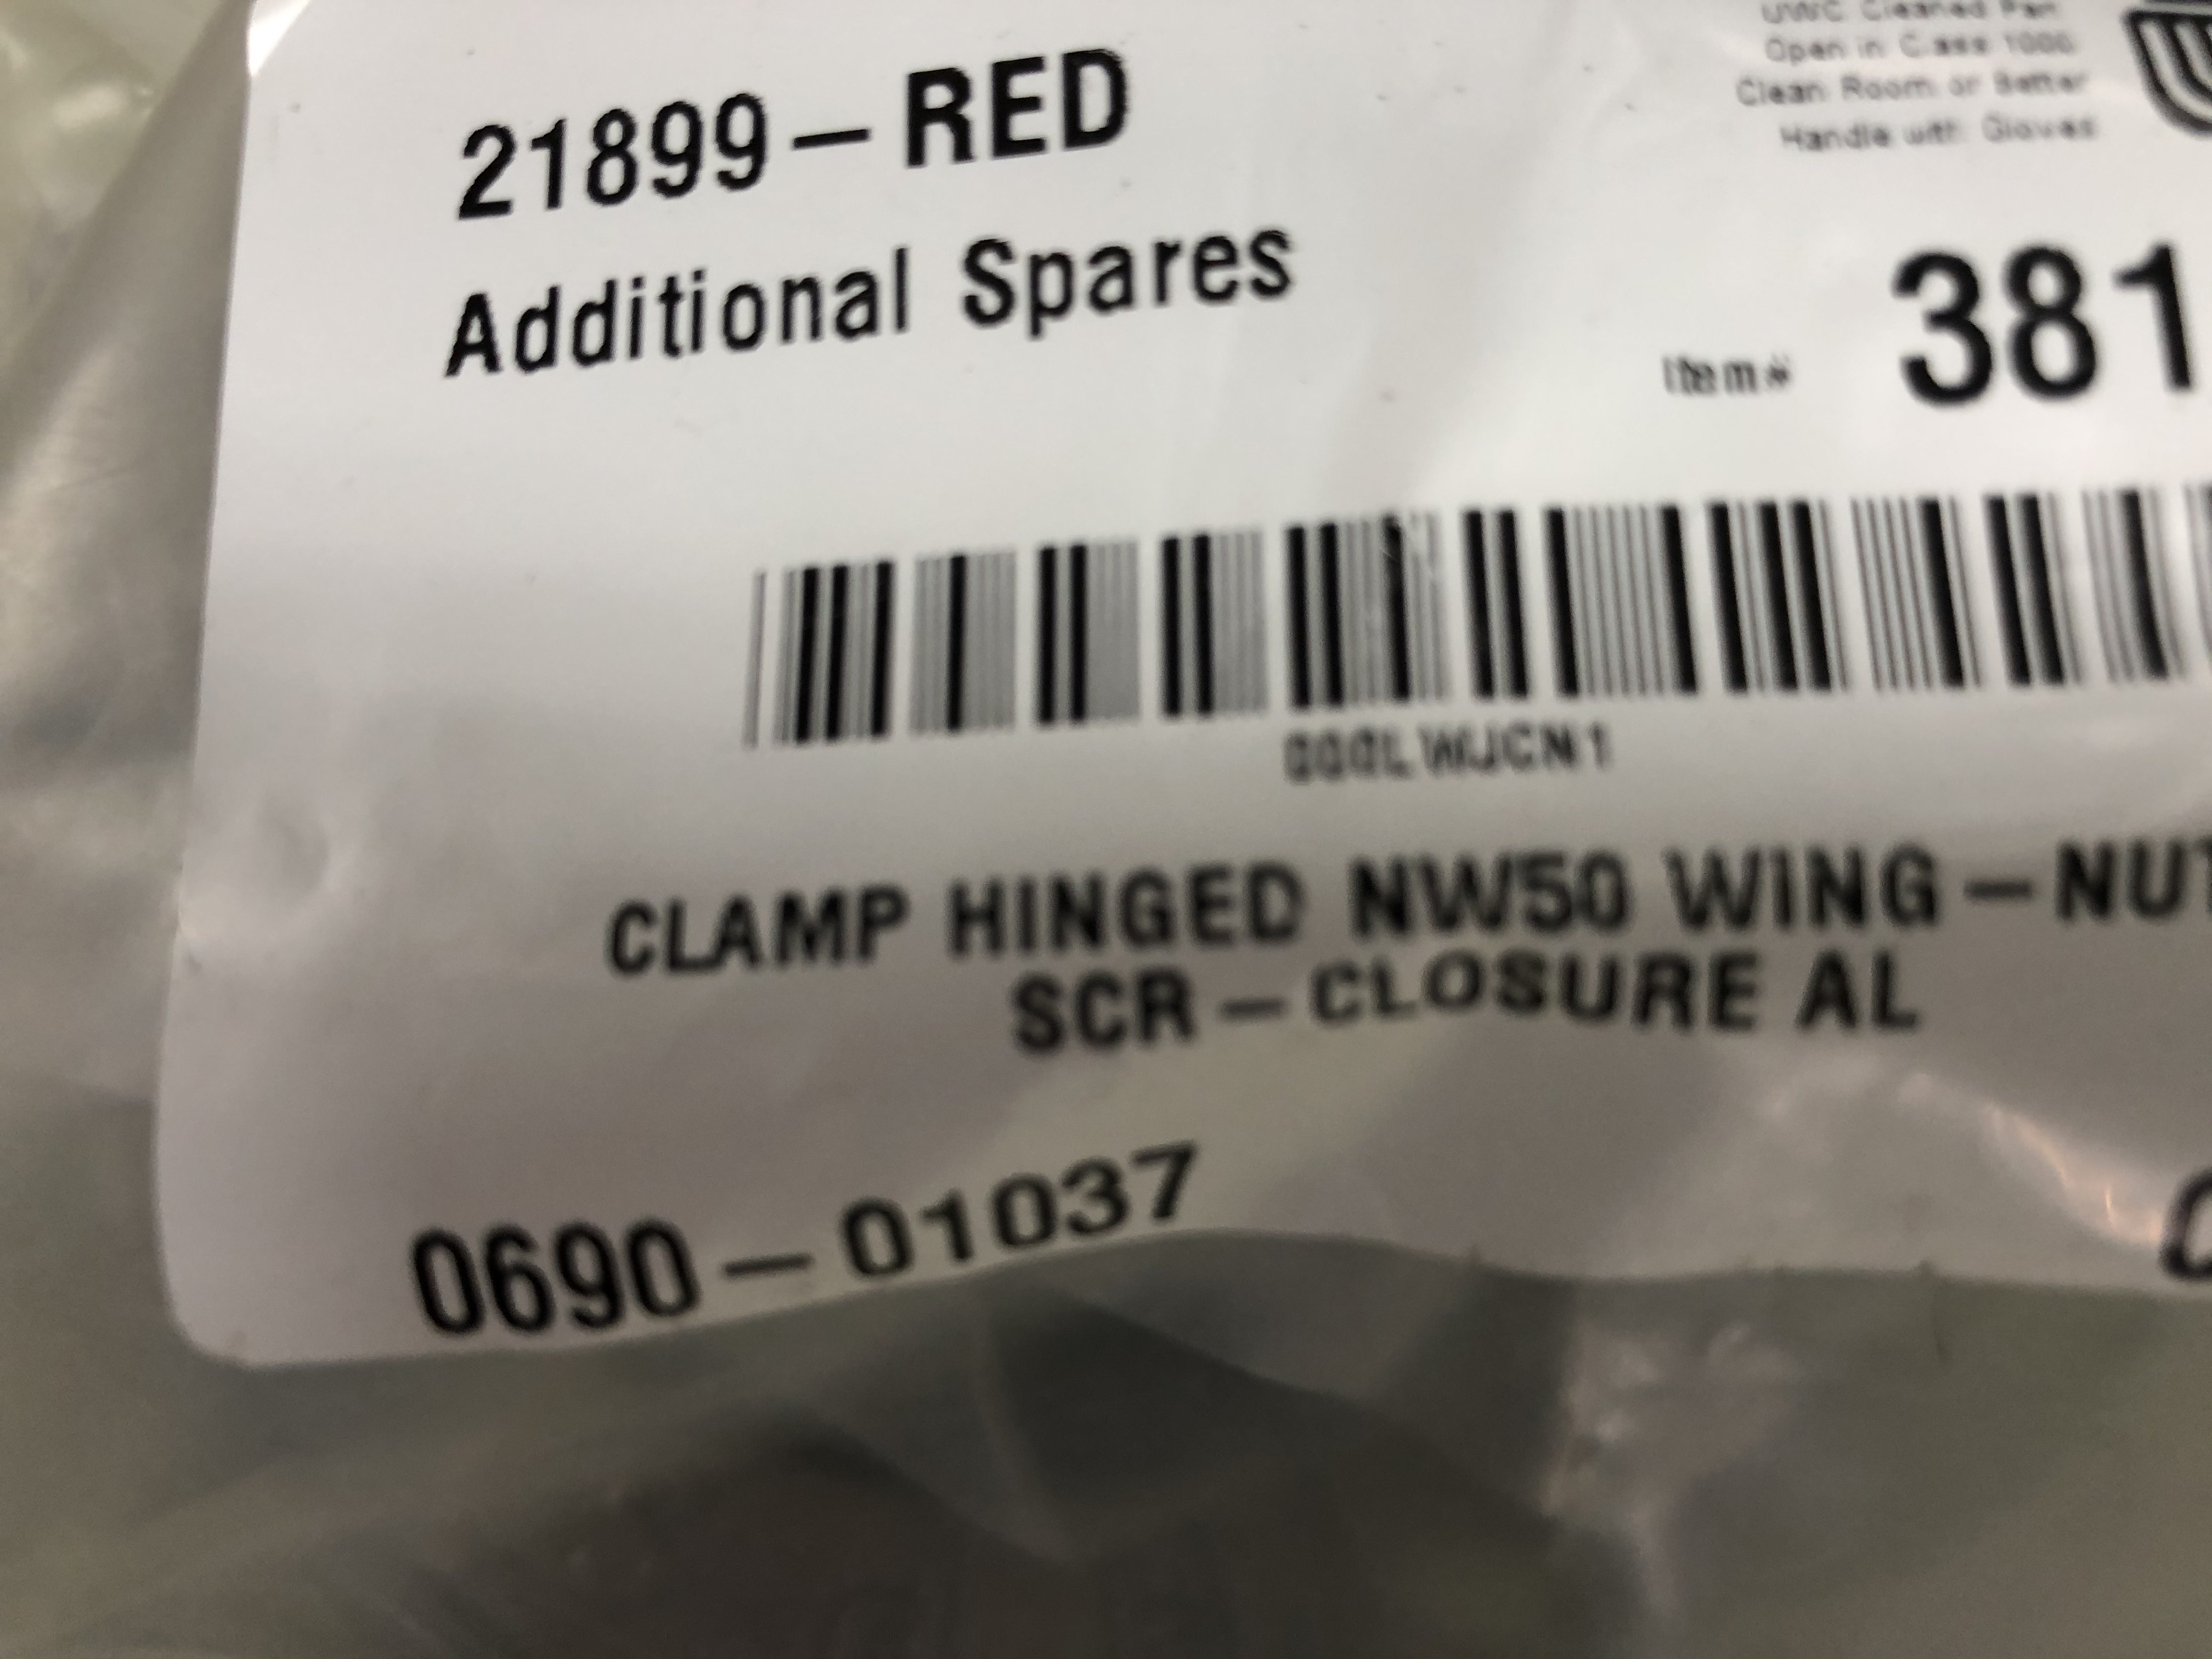 CLAMP HINGED NW50 WING-NUT & SCR-CLOSURE AL